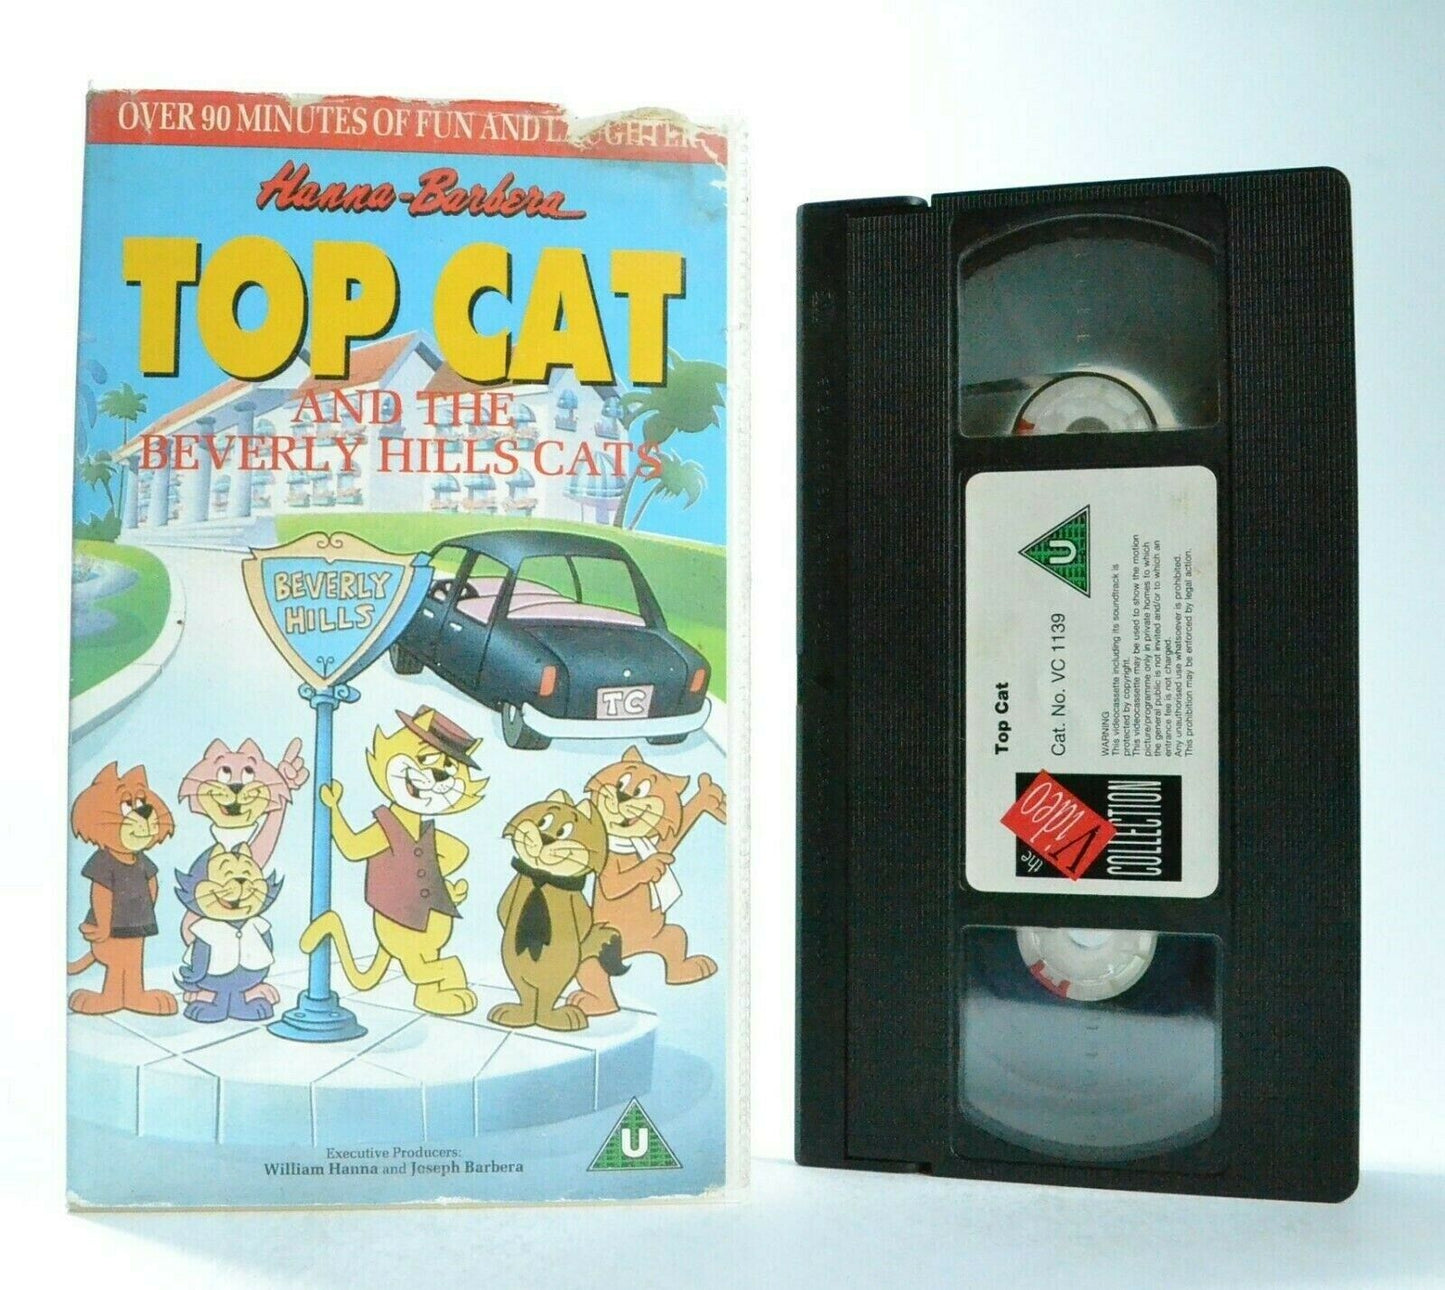 Top Cat And The Beverly Hills Cats: (1988) Hanna-Barbera - Animated - Kids - VHS-